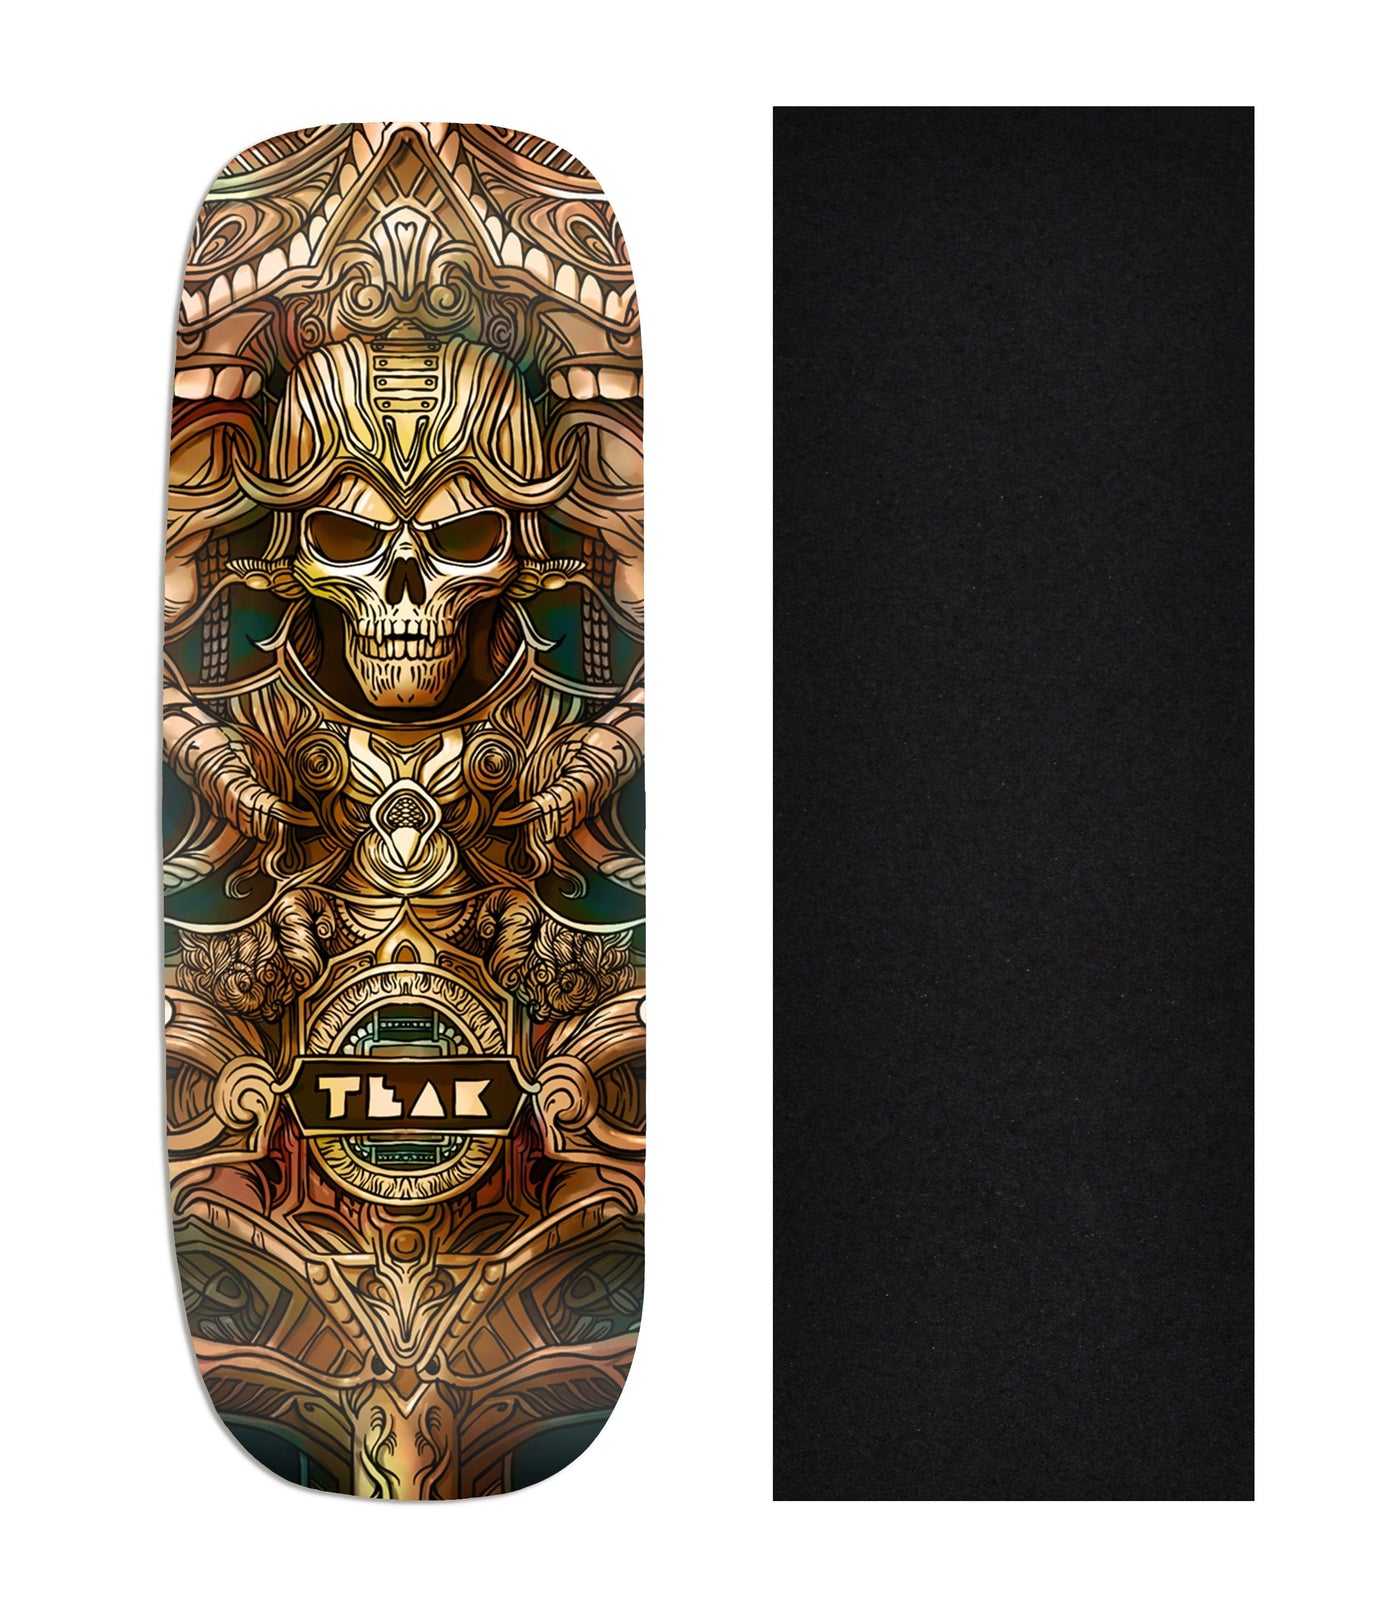 Teak Tuning Heat Transfer Graphic Wooden Fingerboard Deck, "Ancient Ruins" Boxy Deck